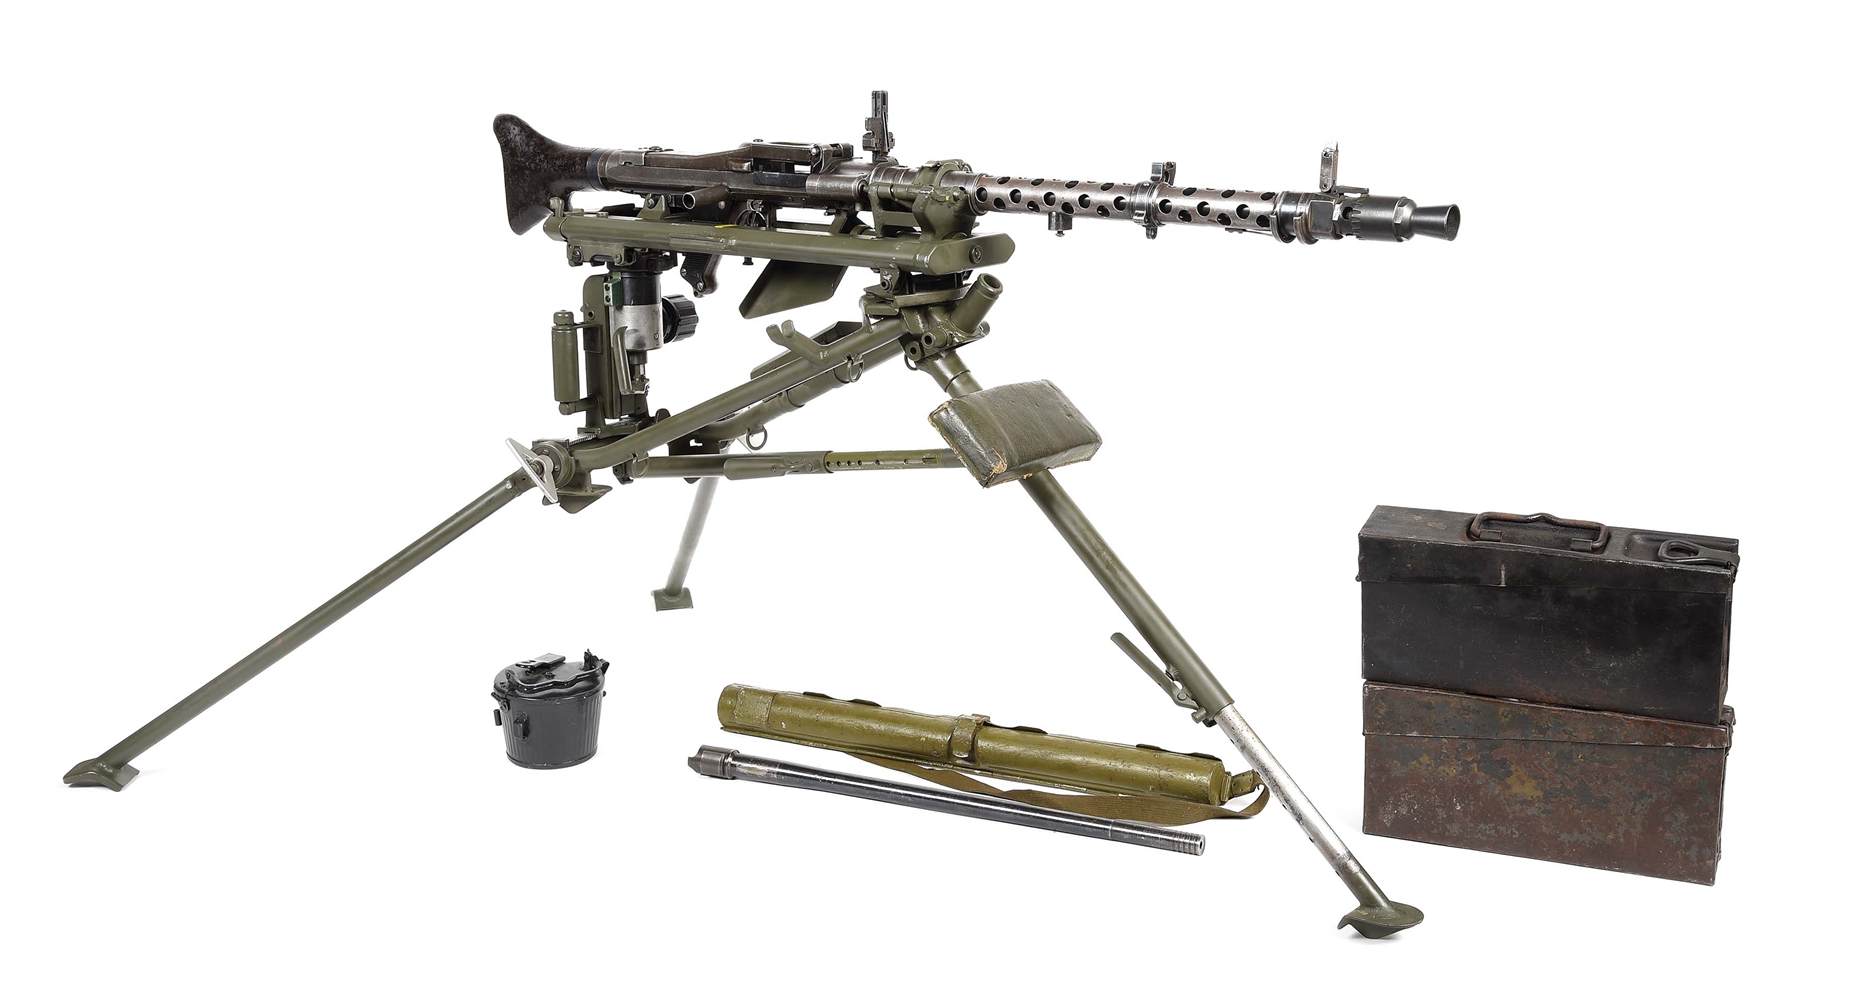 (N) SCARCE EARLY 1938 BERLIN SUHLER-WAFFEN MG-34 MACHINE GUN WITH LAFETTE TRIPOD AND ACCESSORIES (PRE-86 DEALER SAMPLE).